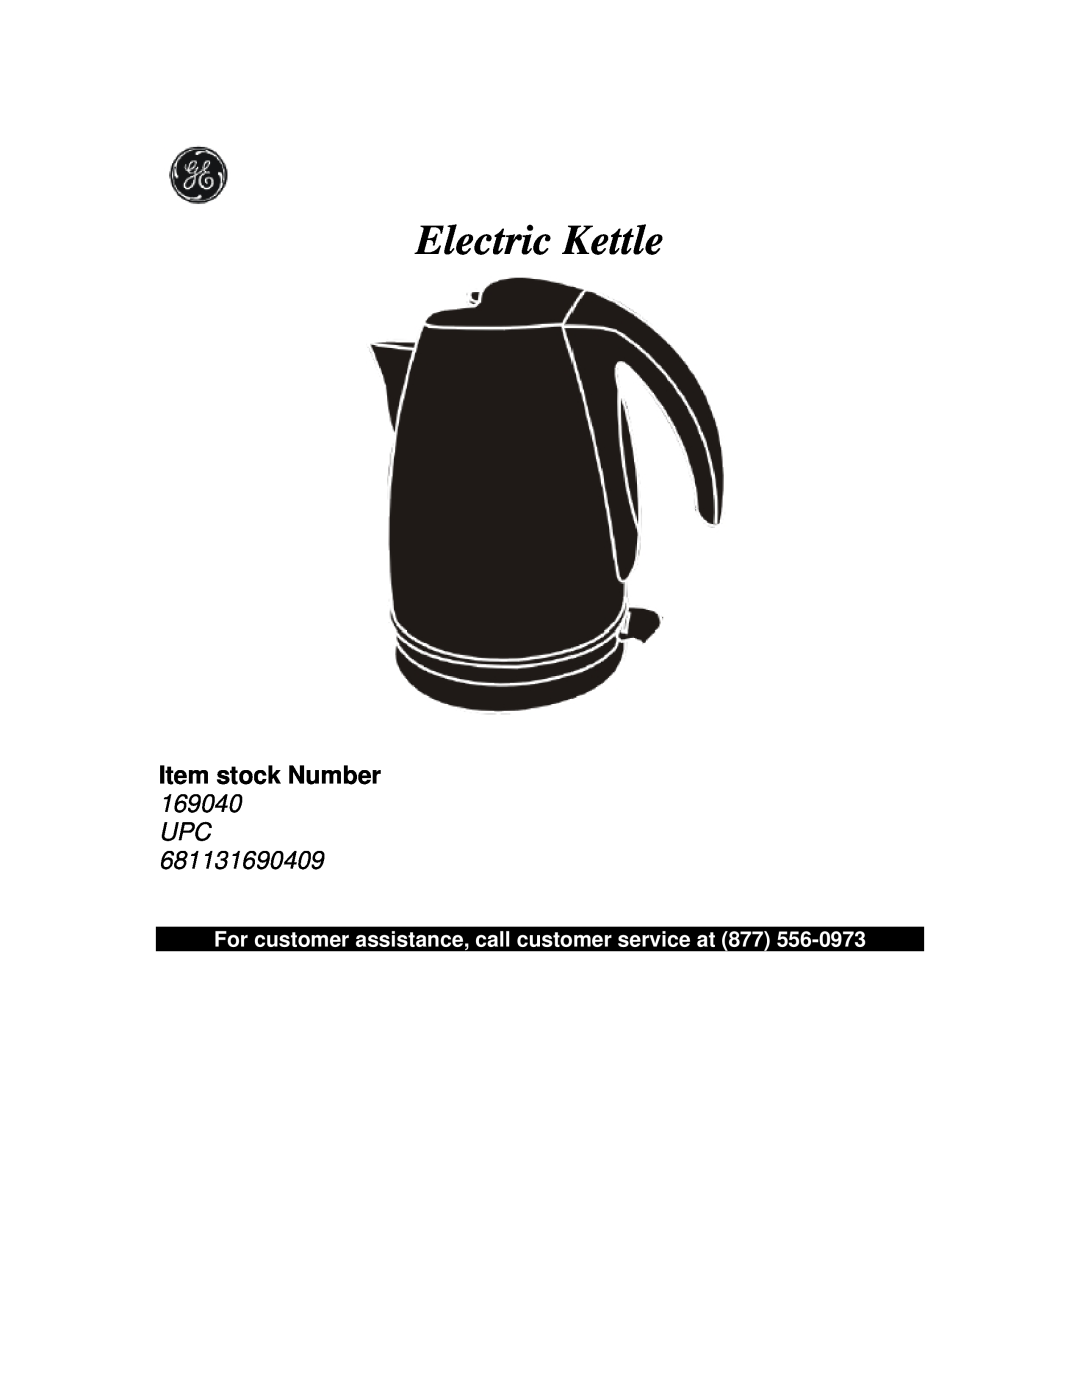 GE 681131690409 manual Item stock Number, Electric Kettle, For customer assistance, call customer service at 